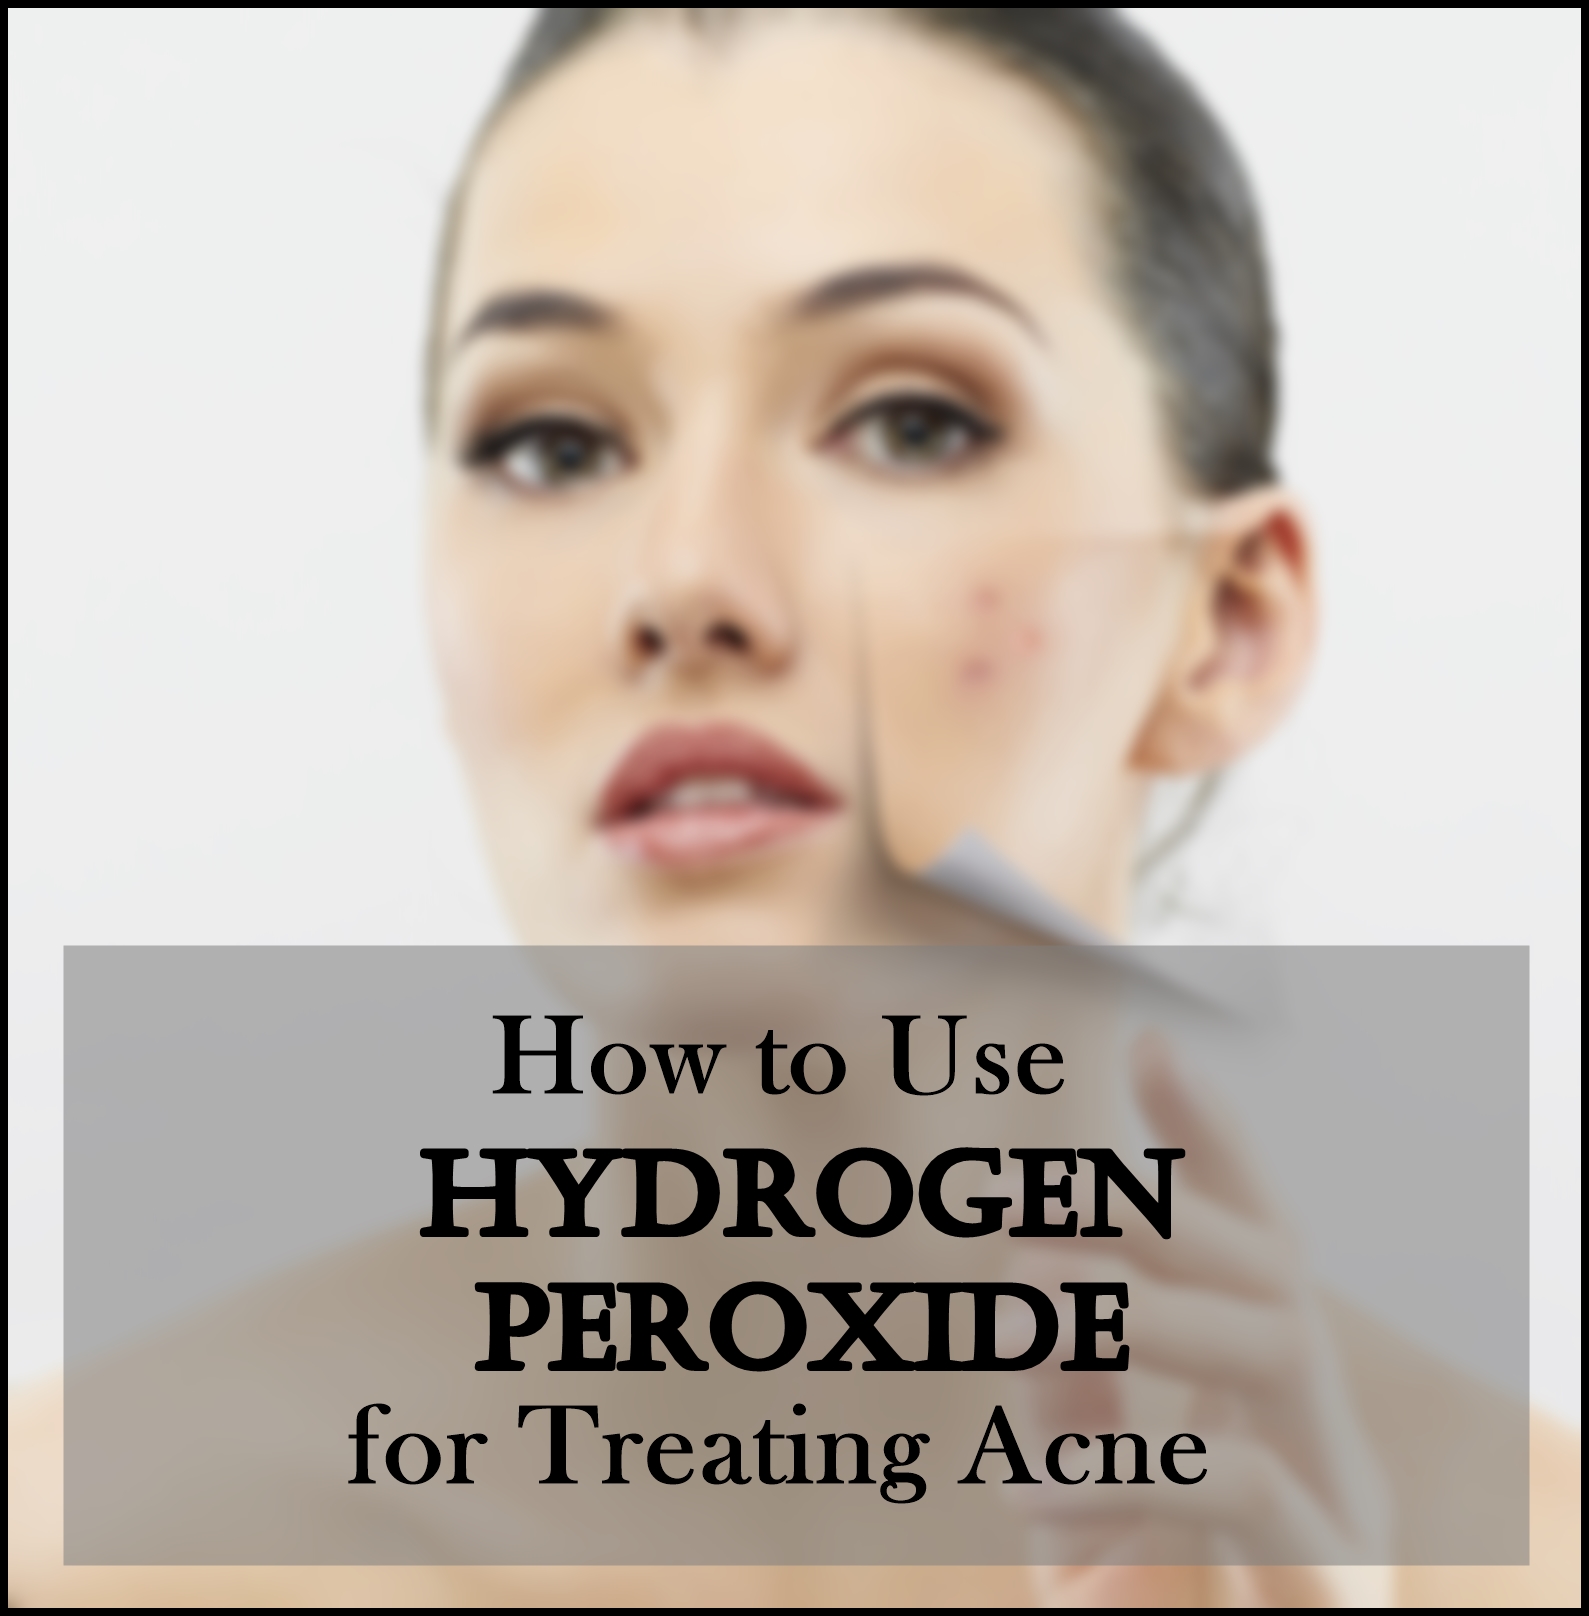 How to Use Hydrogen Peroxide for Treating AcneHow to Use Hydrogen Peroxide for Treating Acne